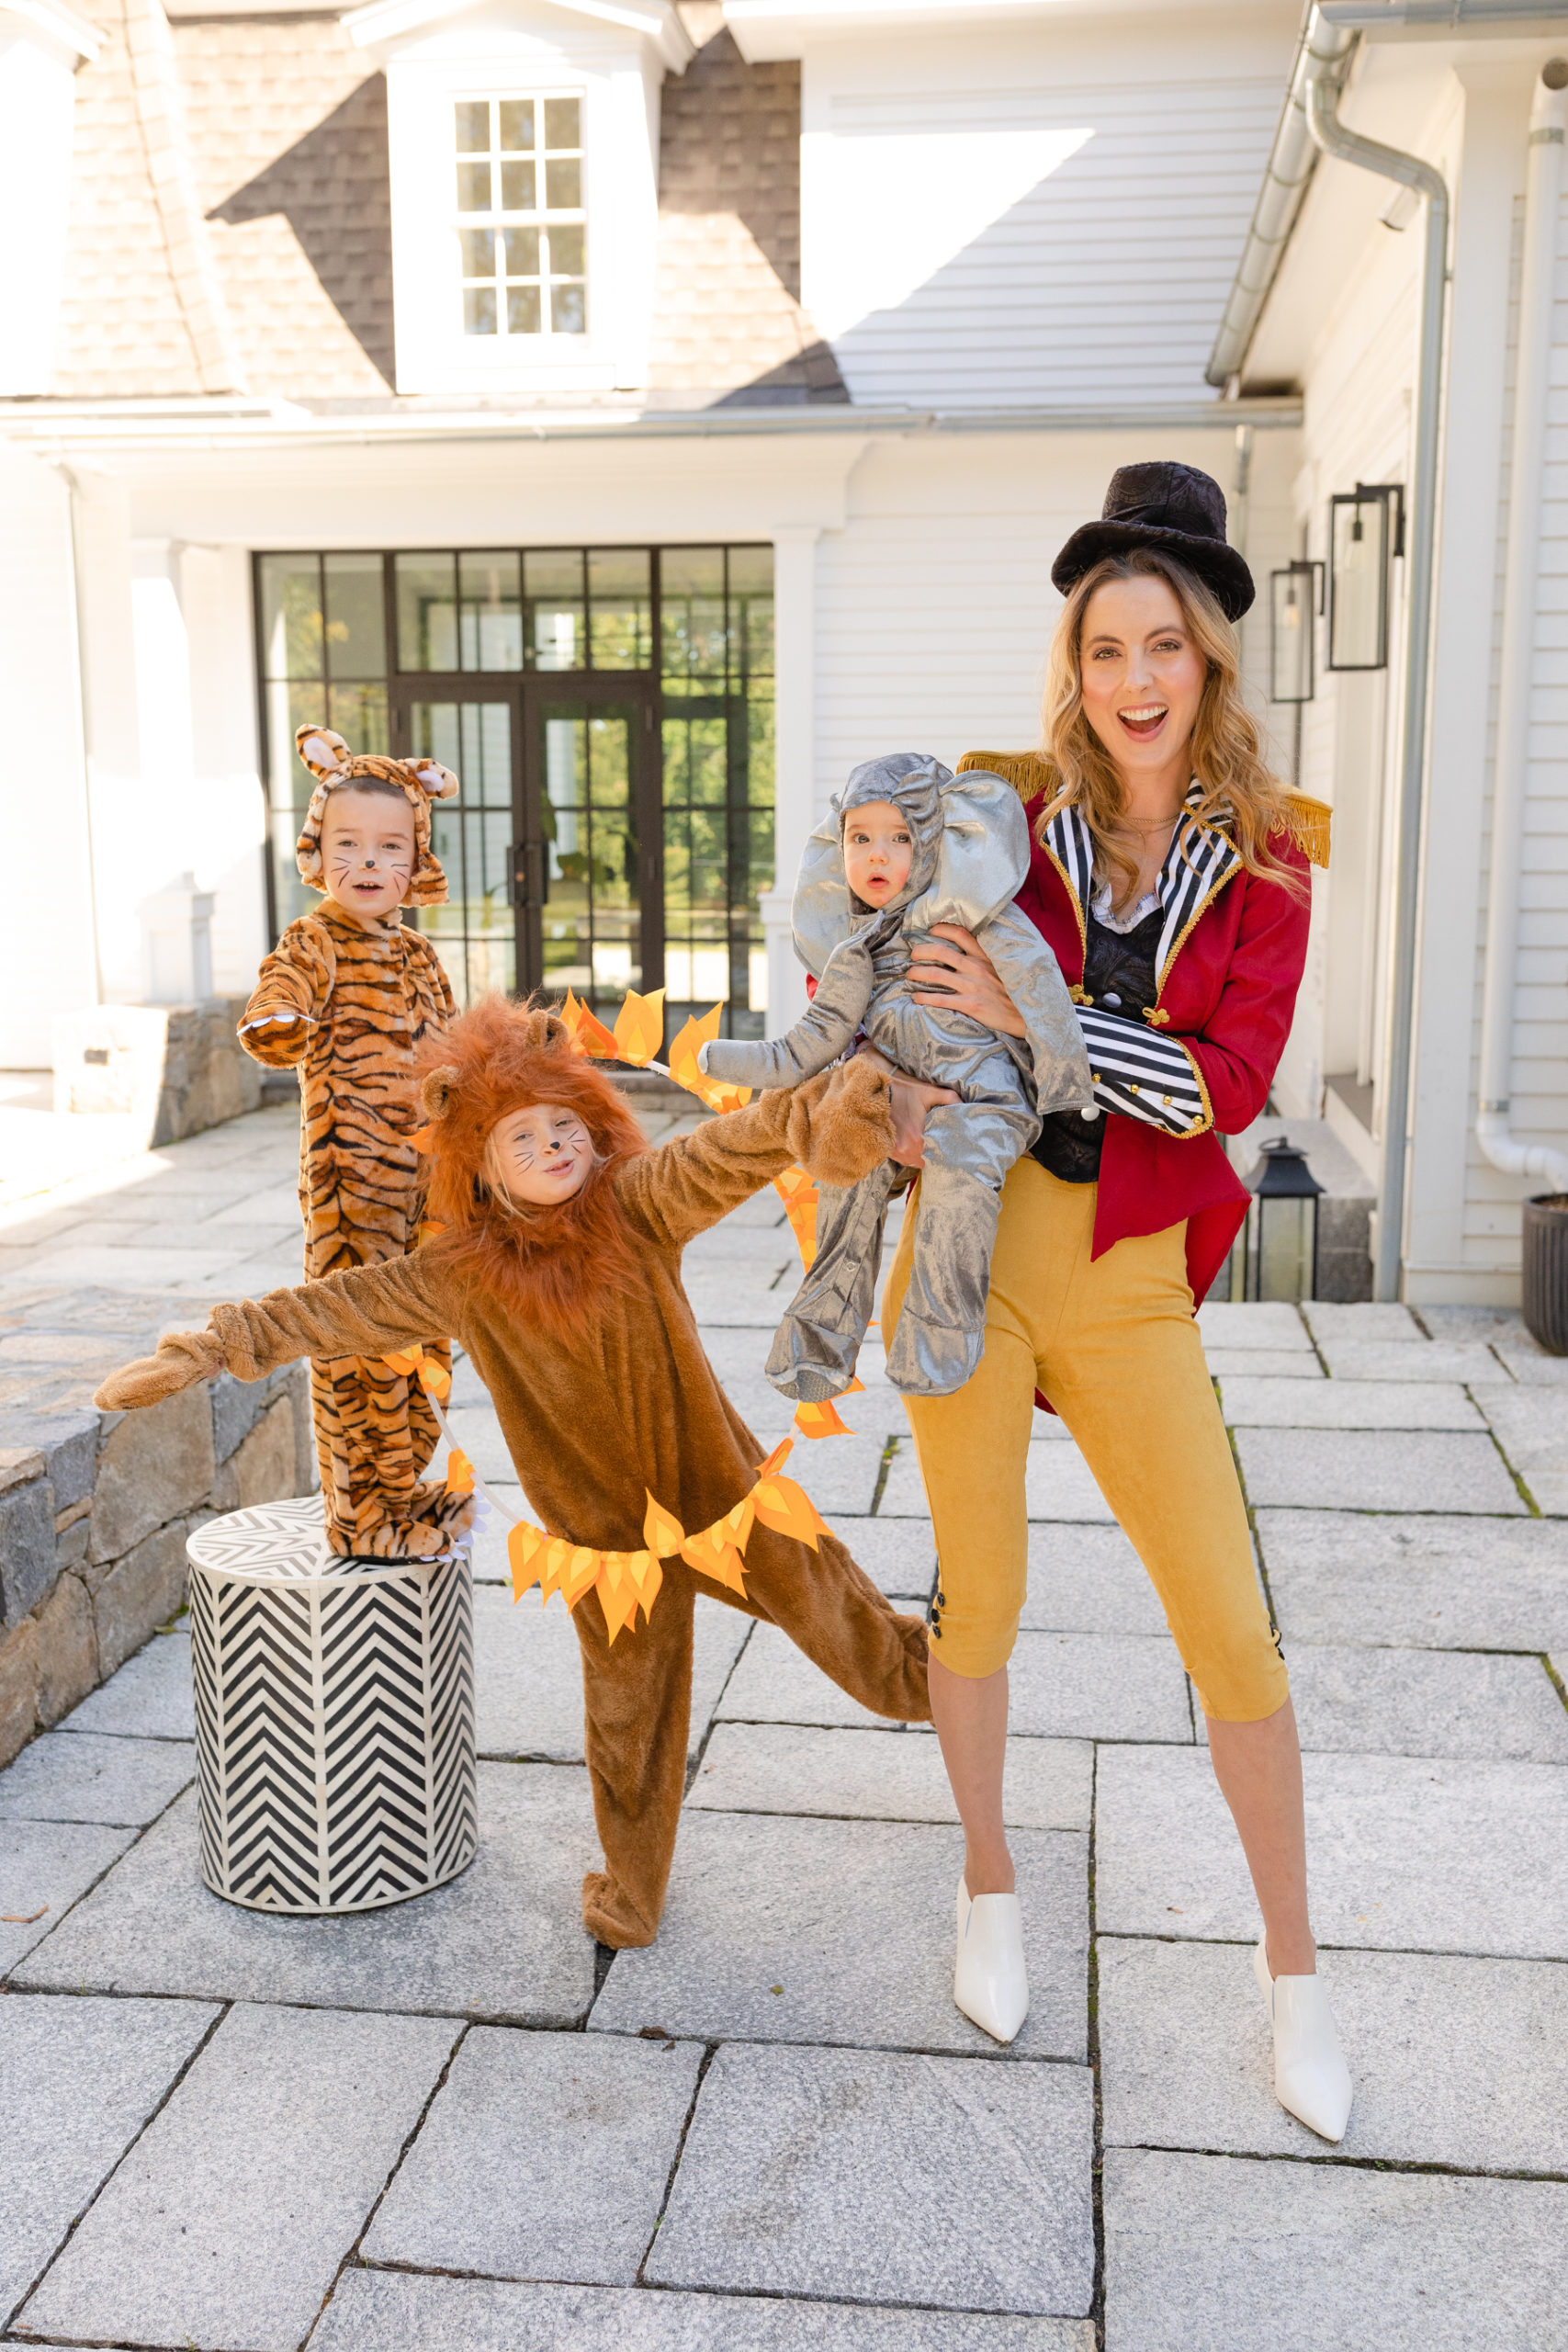 Family Halloween Costumes: Welcome to the Circus! - Happily Eva After